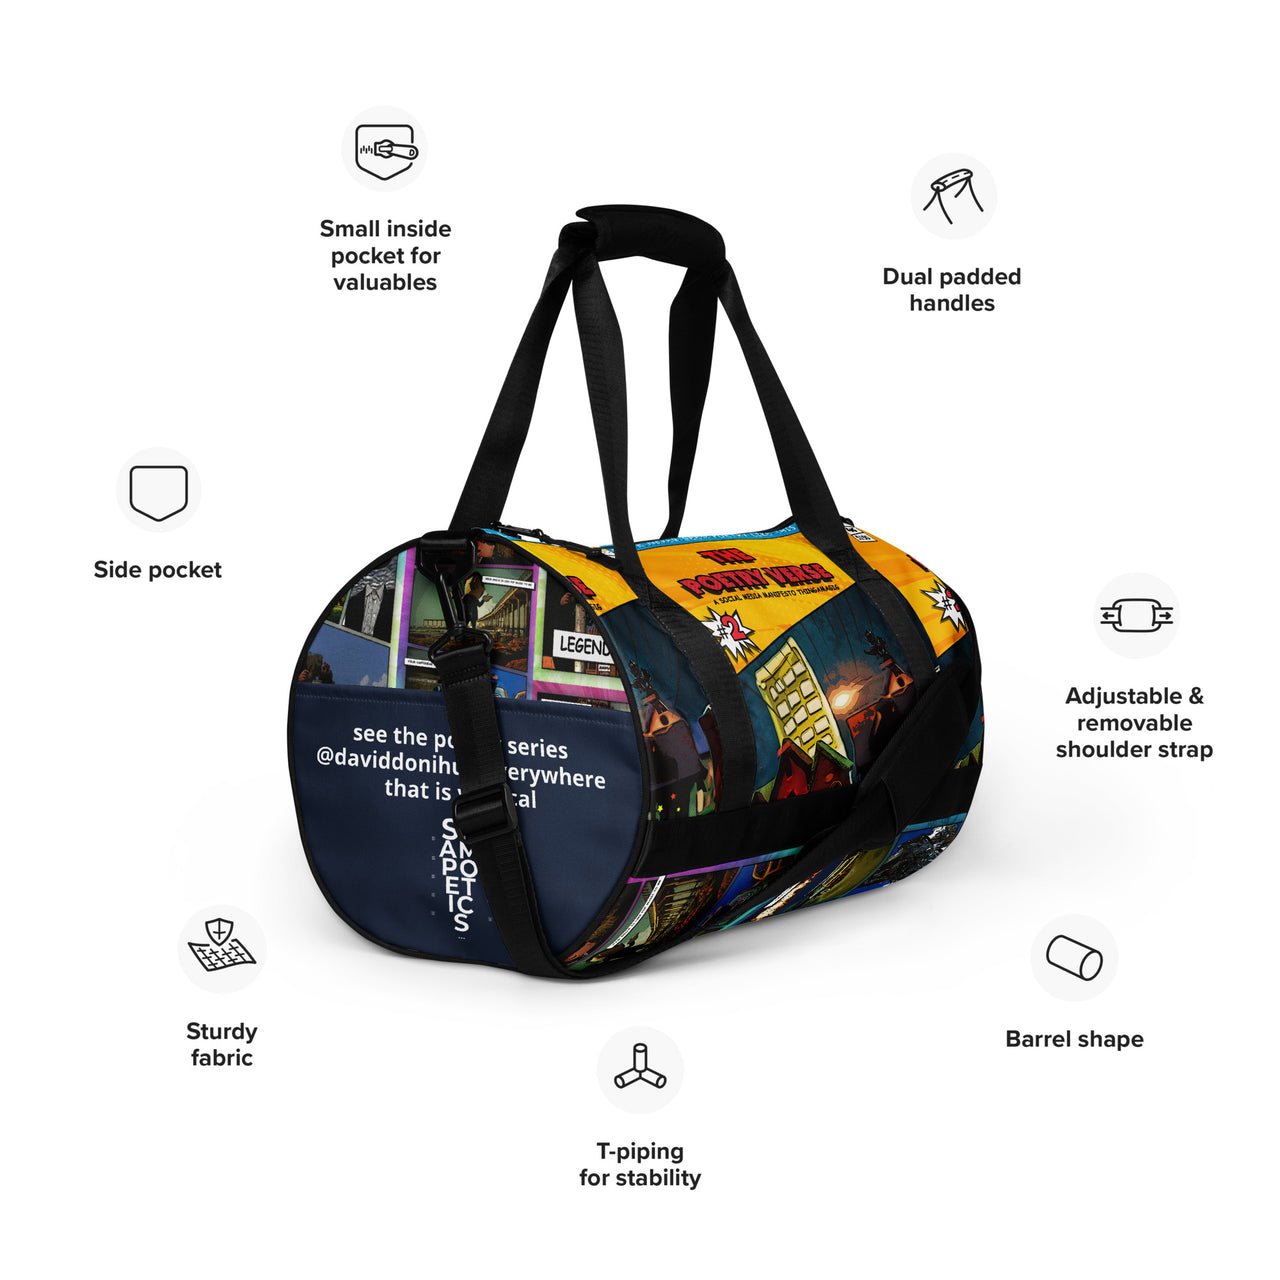 The Poetry Verse Duffle Book & Gym Bag - Funny Multi-Verse Print